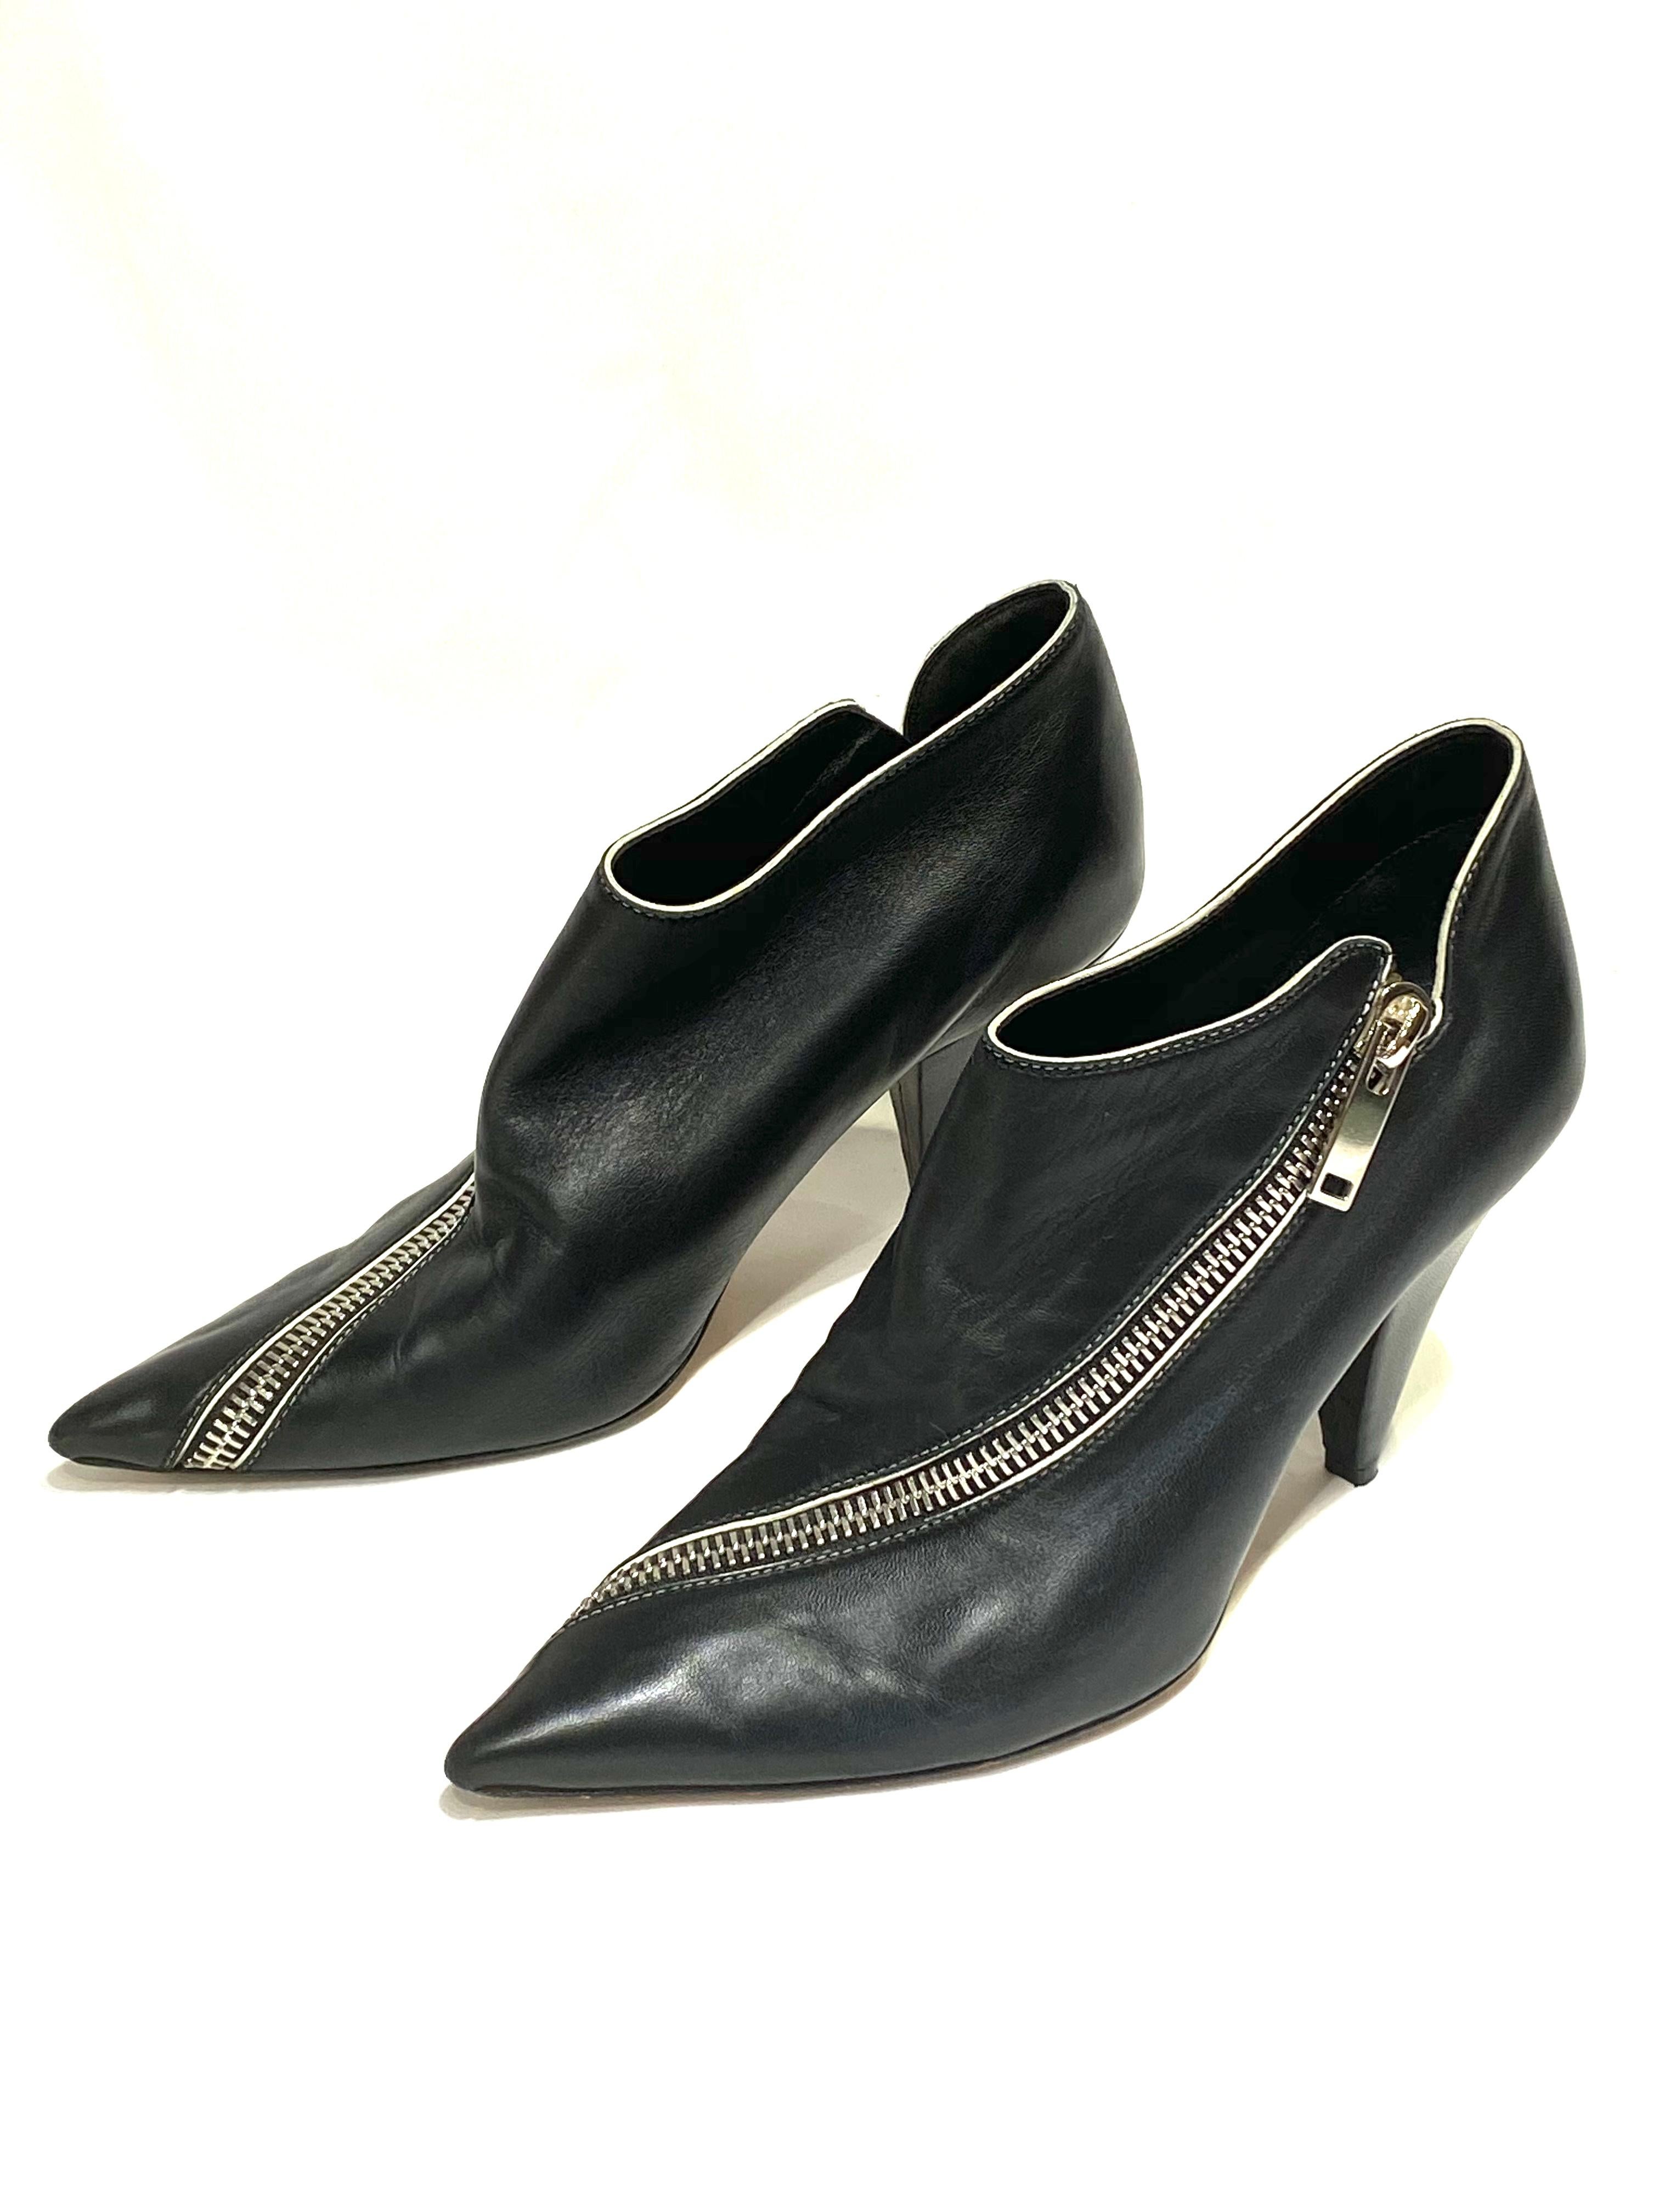 Product details:

Featuring supple black nappa leather, glossy silver-tone zipper, pointy toe, white piping, cone heel (3.75